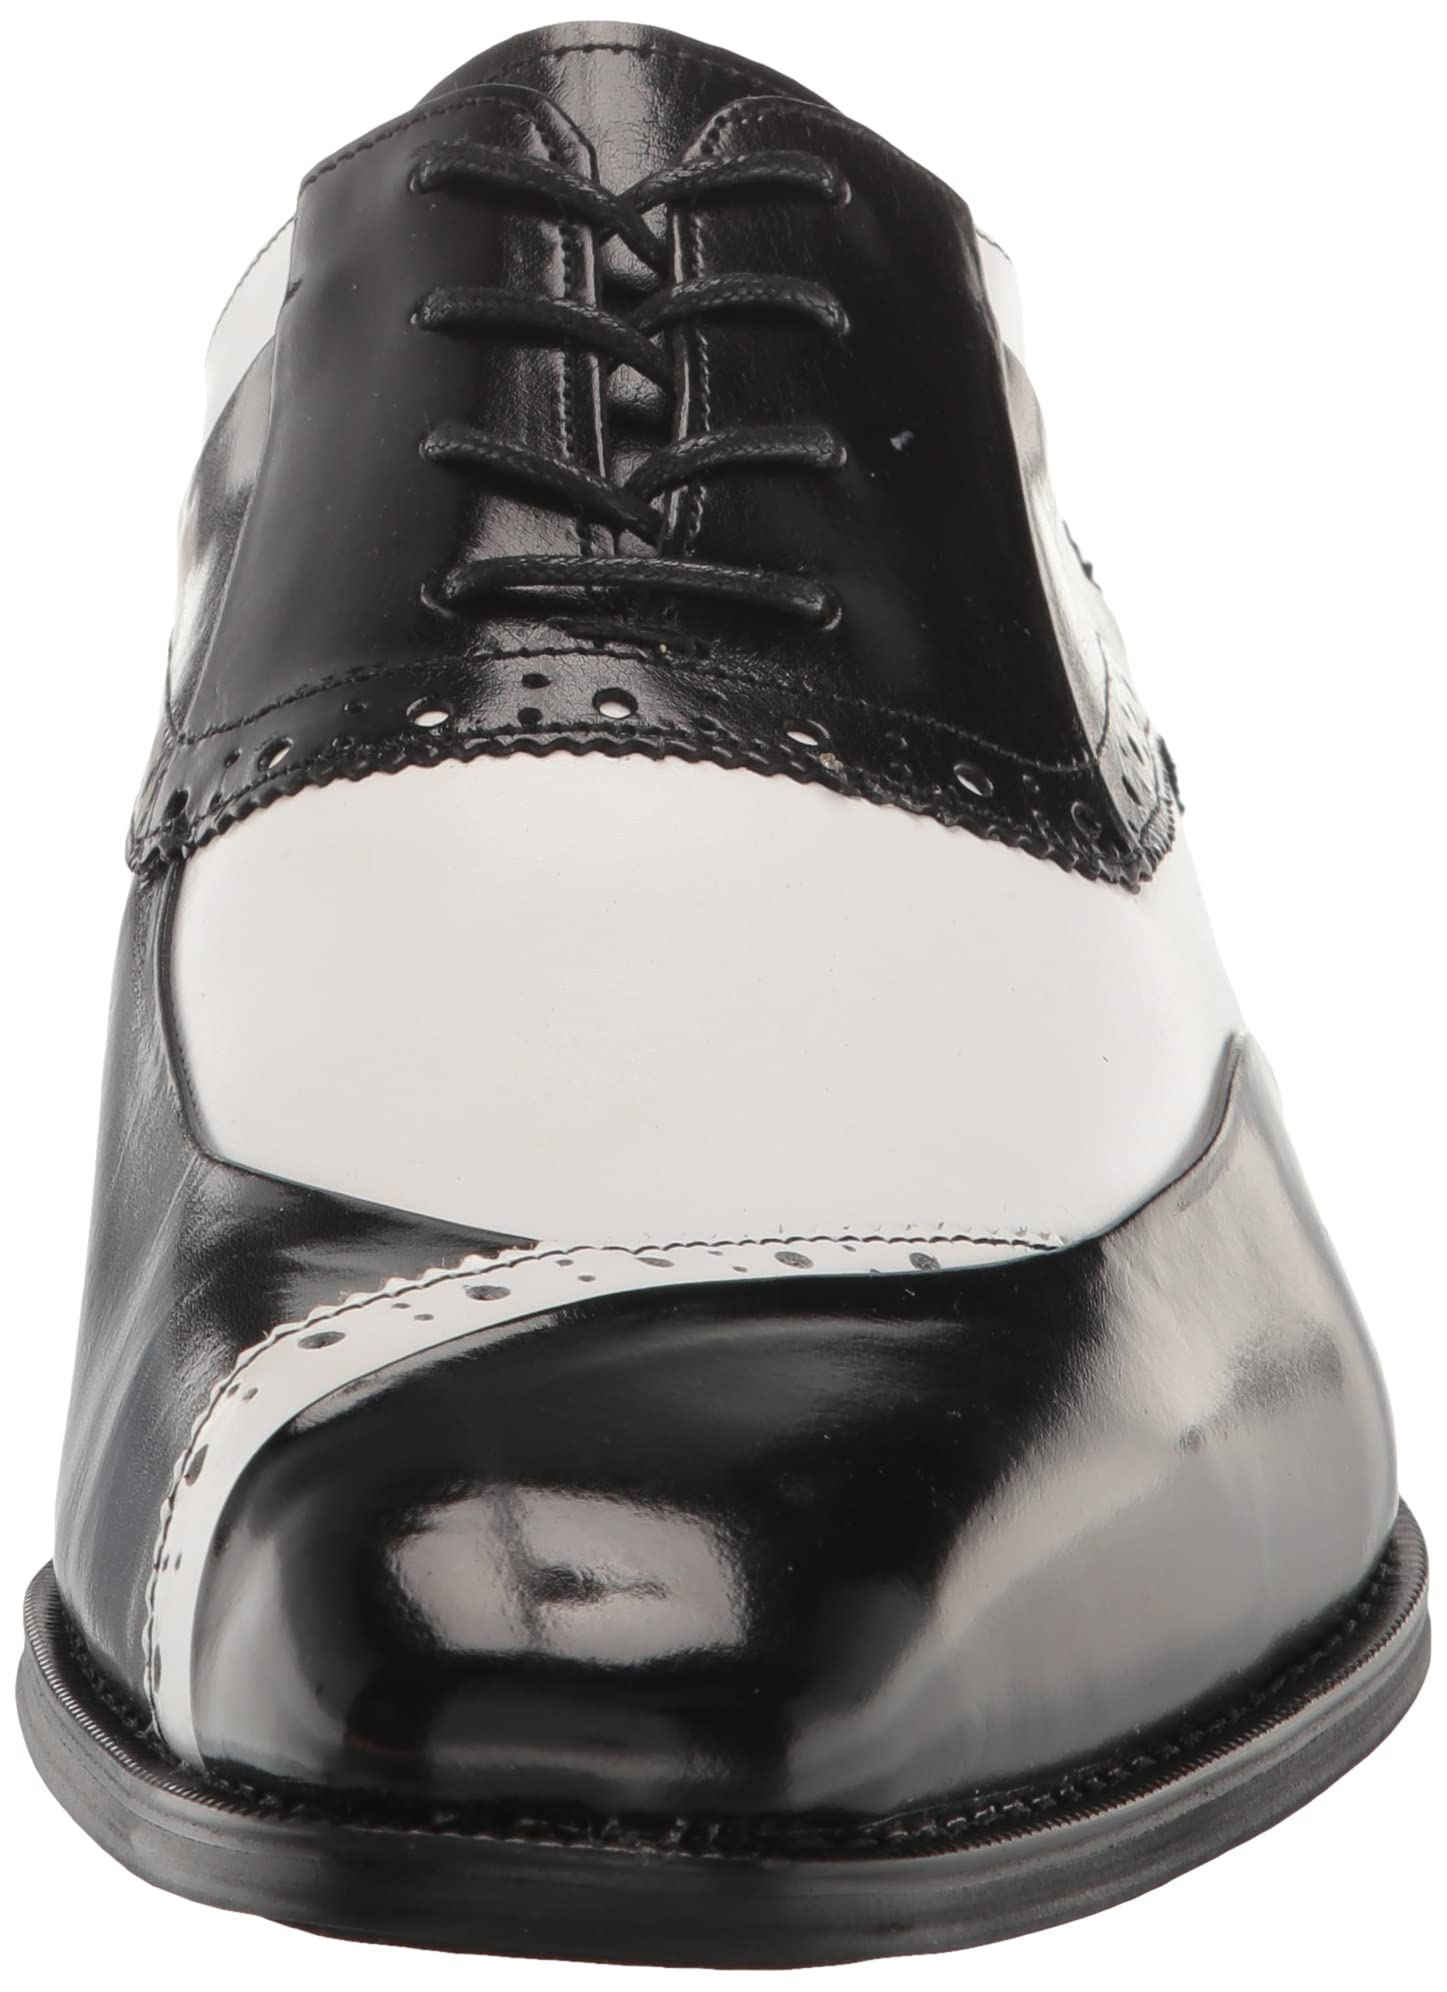 STACY ADAMS Men's Gillam Lace Up Oxford